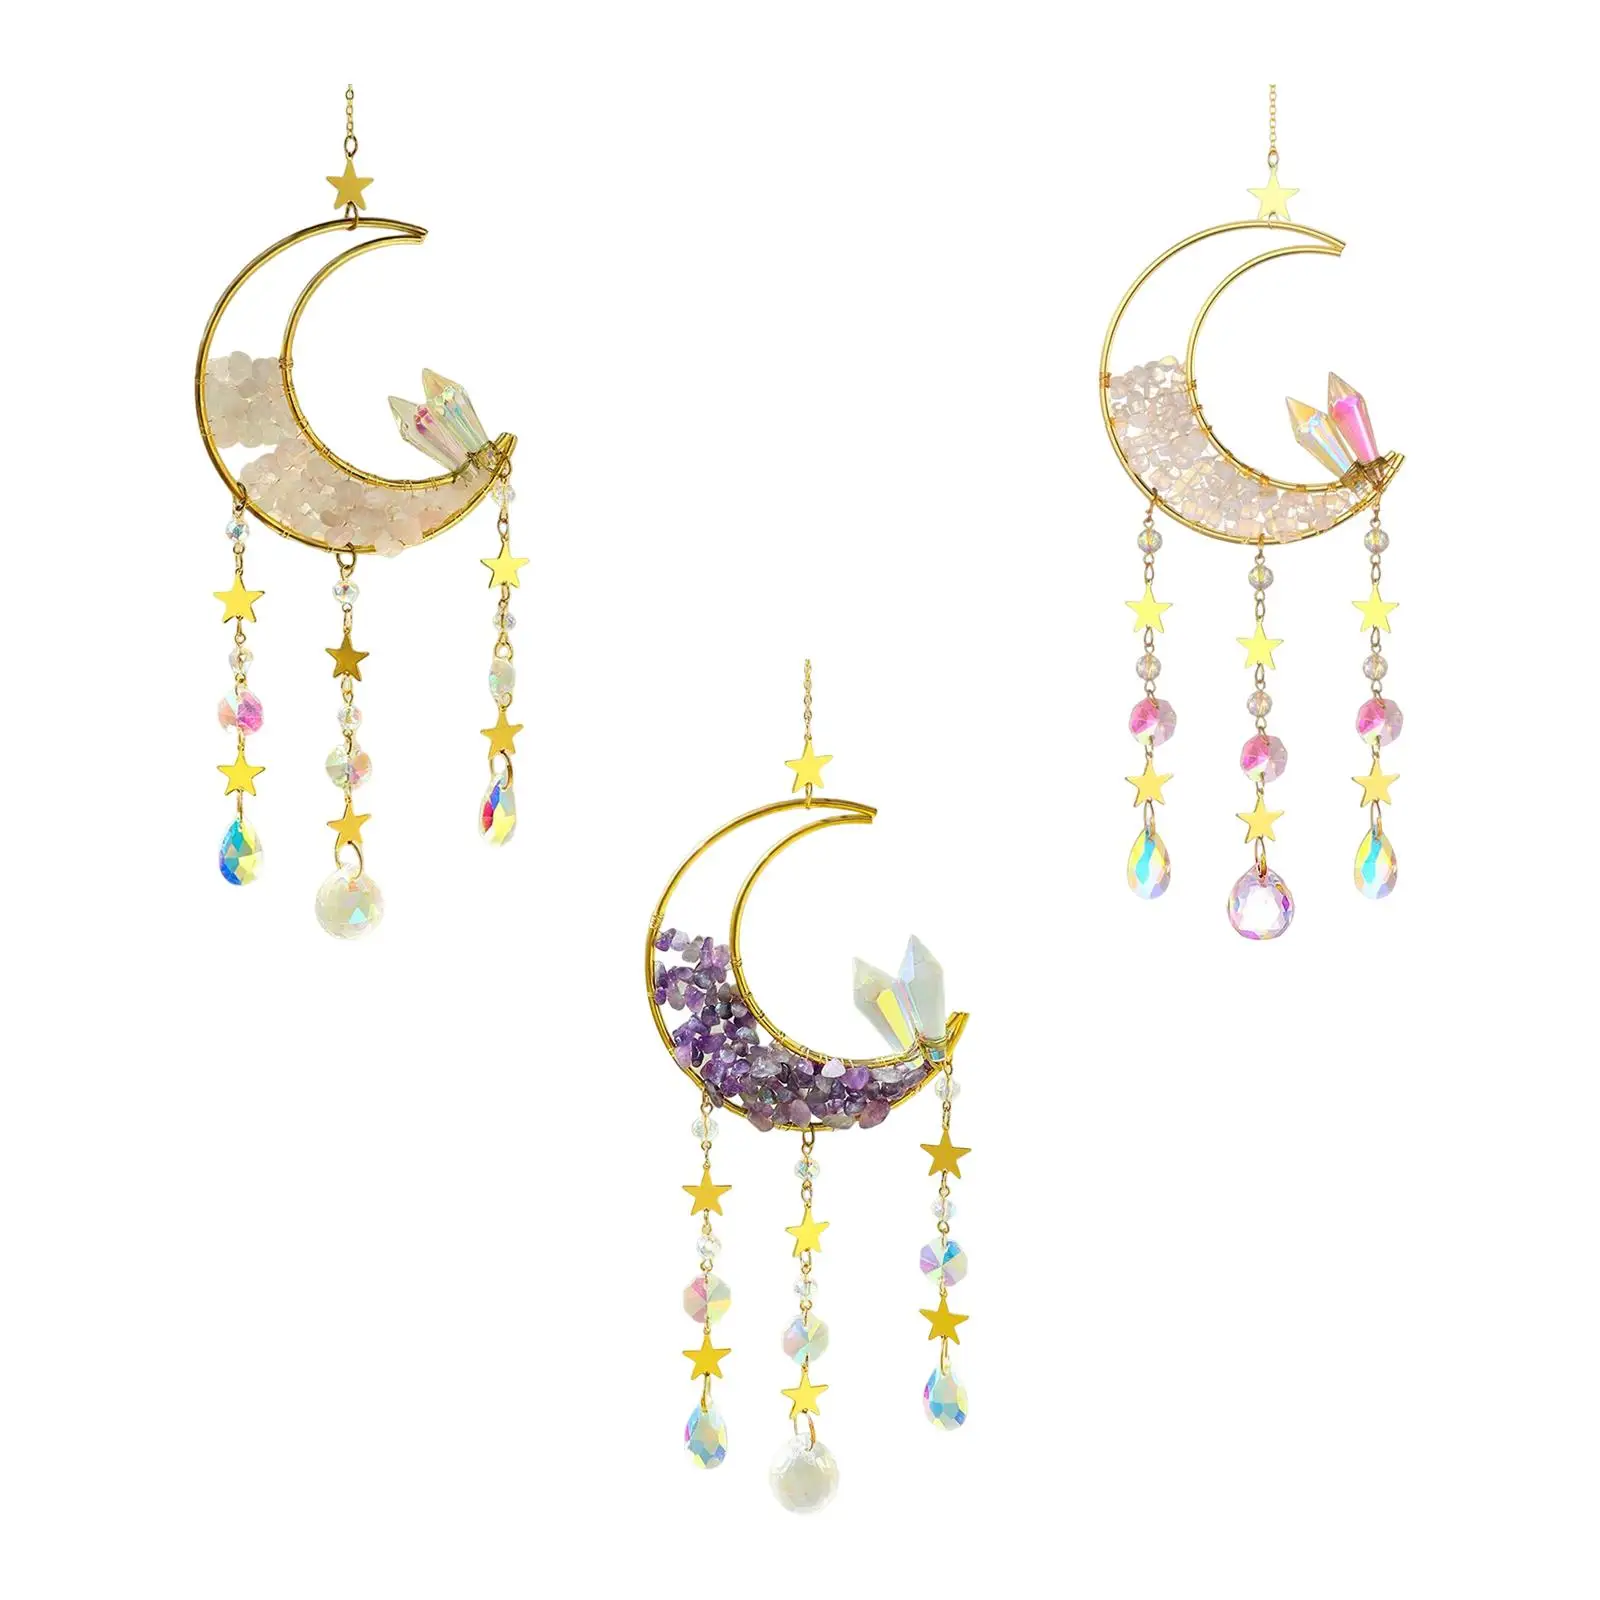 Moon Pendant Wind Chime Decorative for Outdoor Living Room Balcony Decor